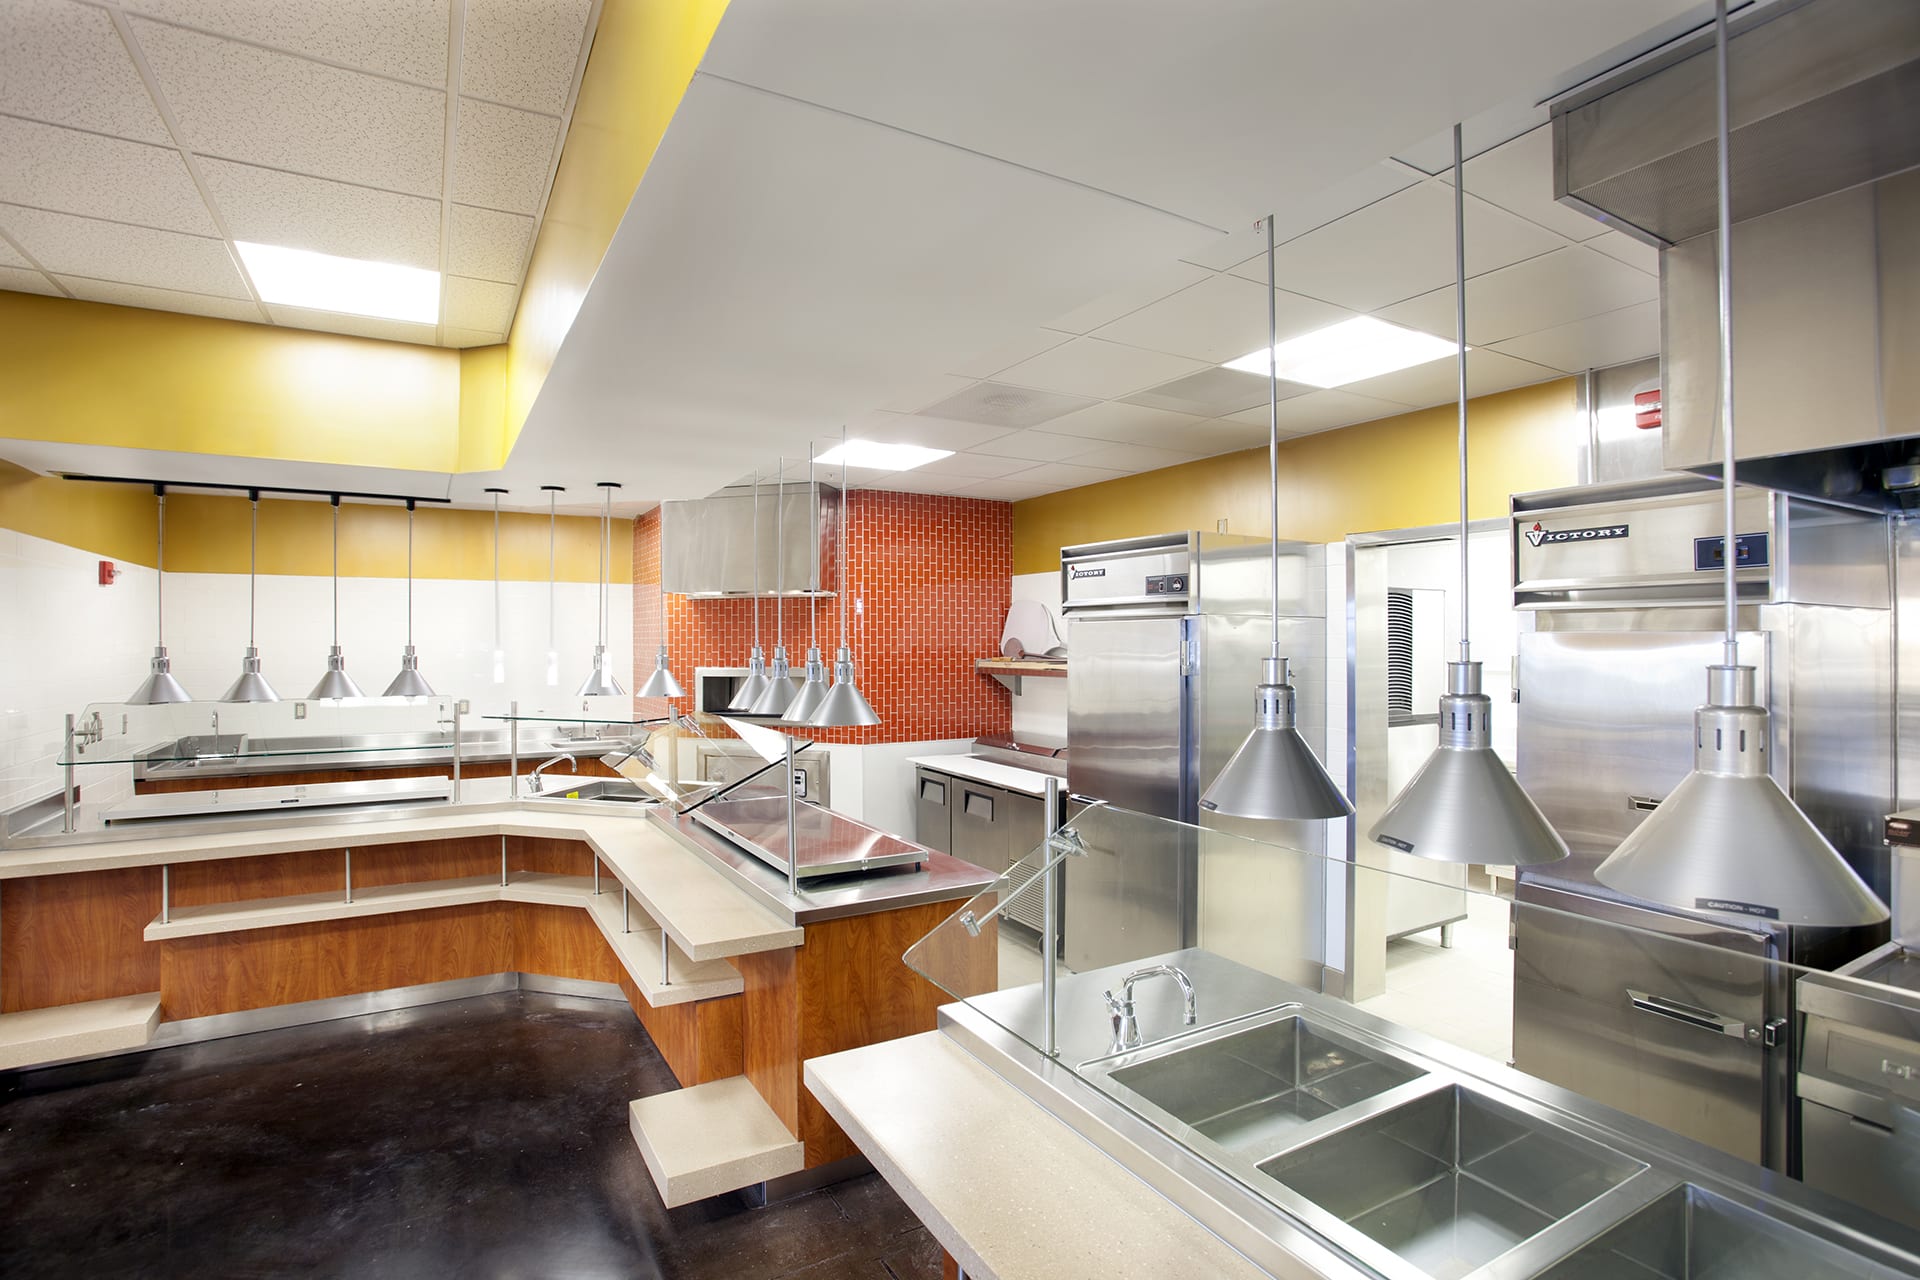 harris stowe university kitchen designed by trivers architectural firm in st. louis